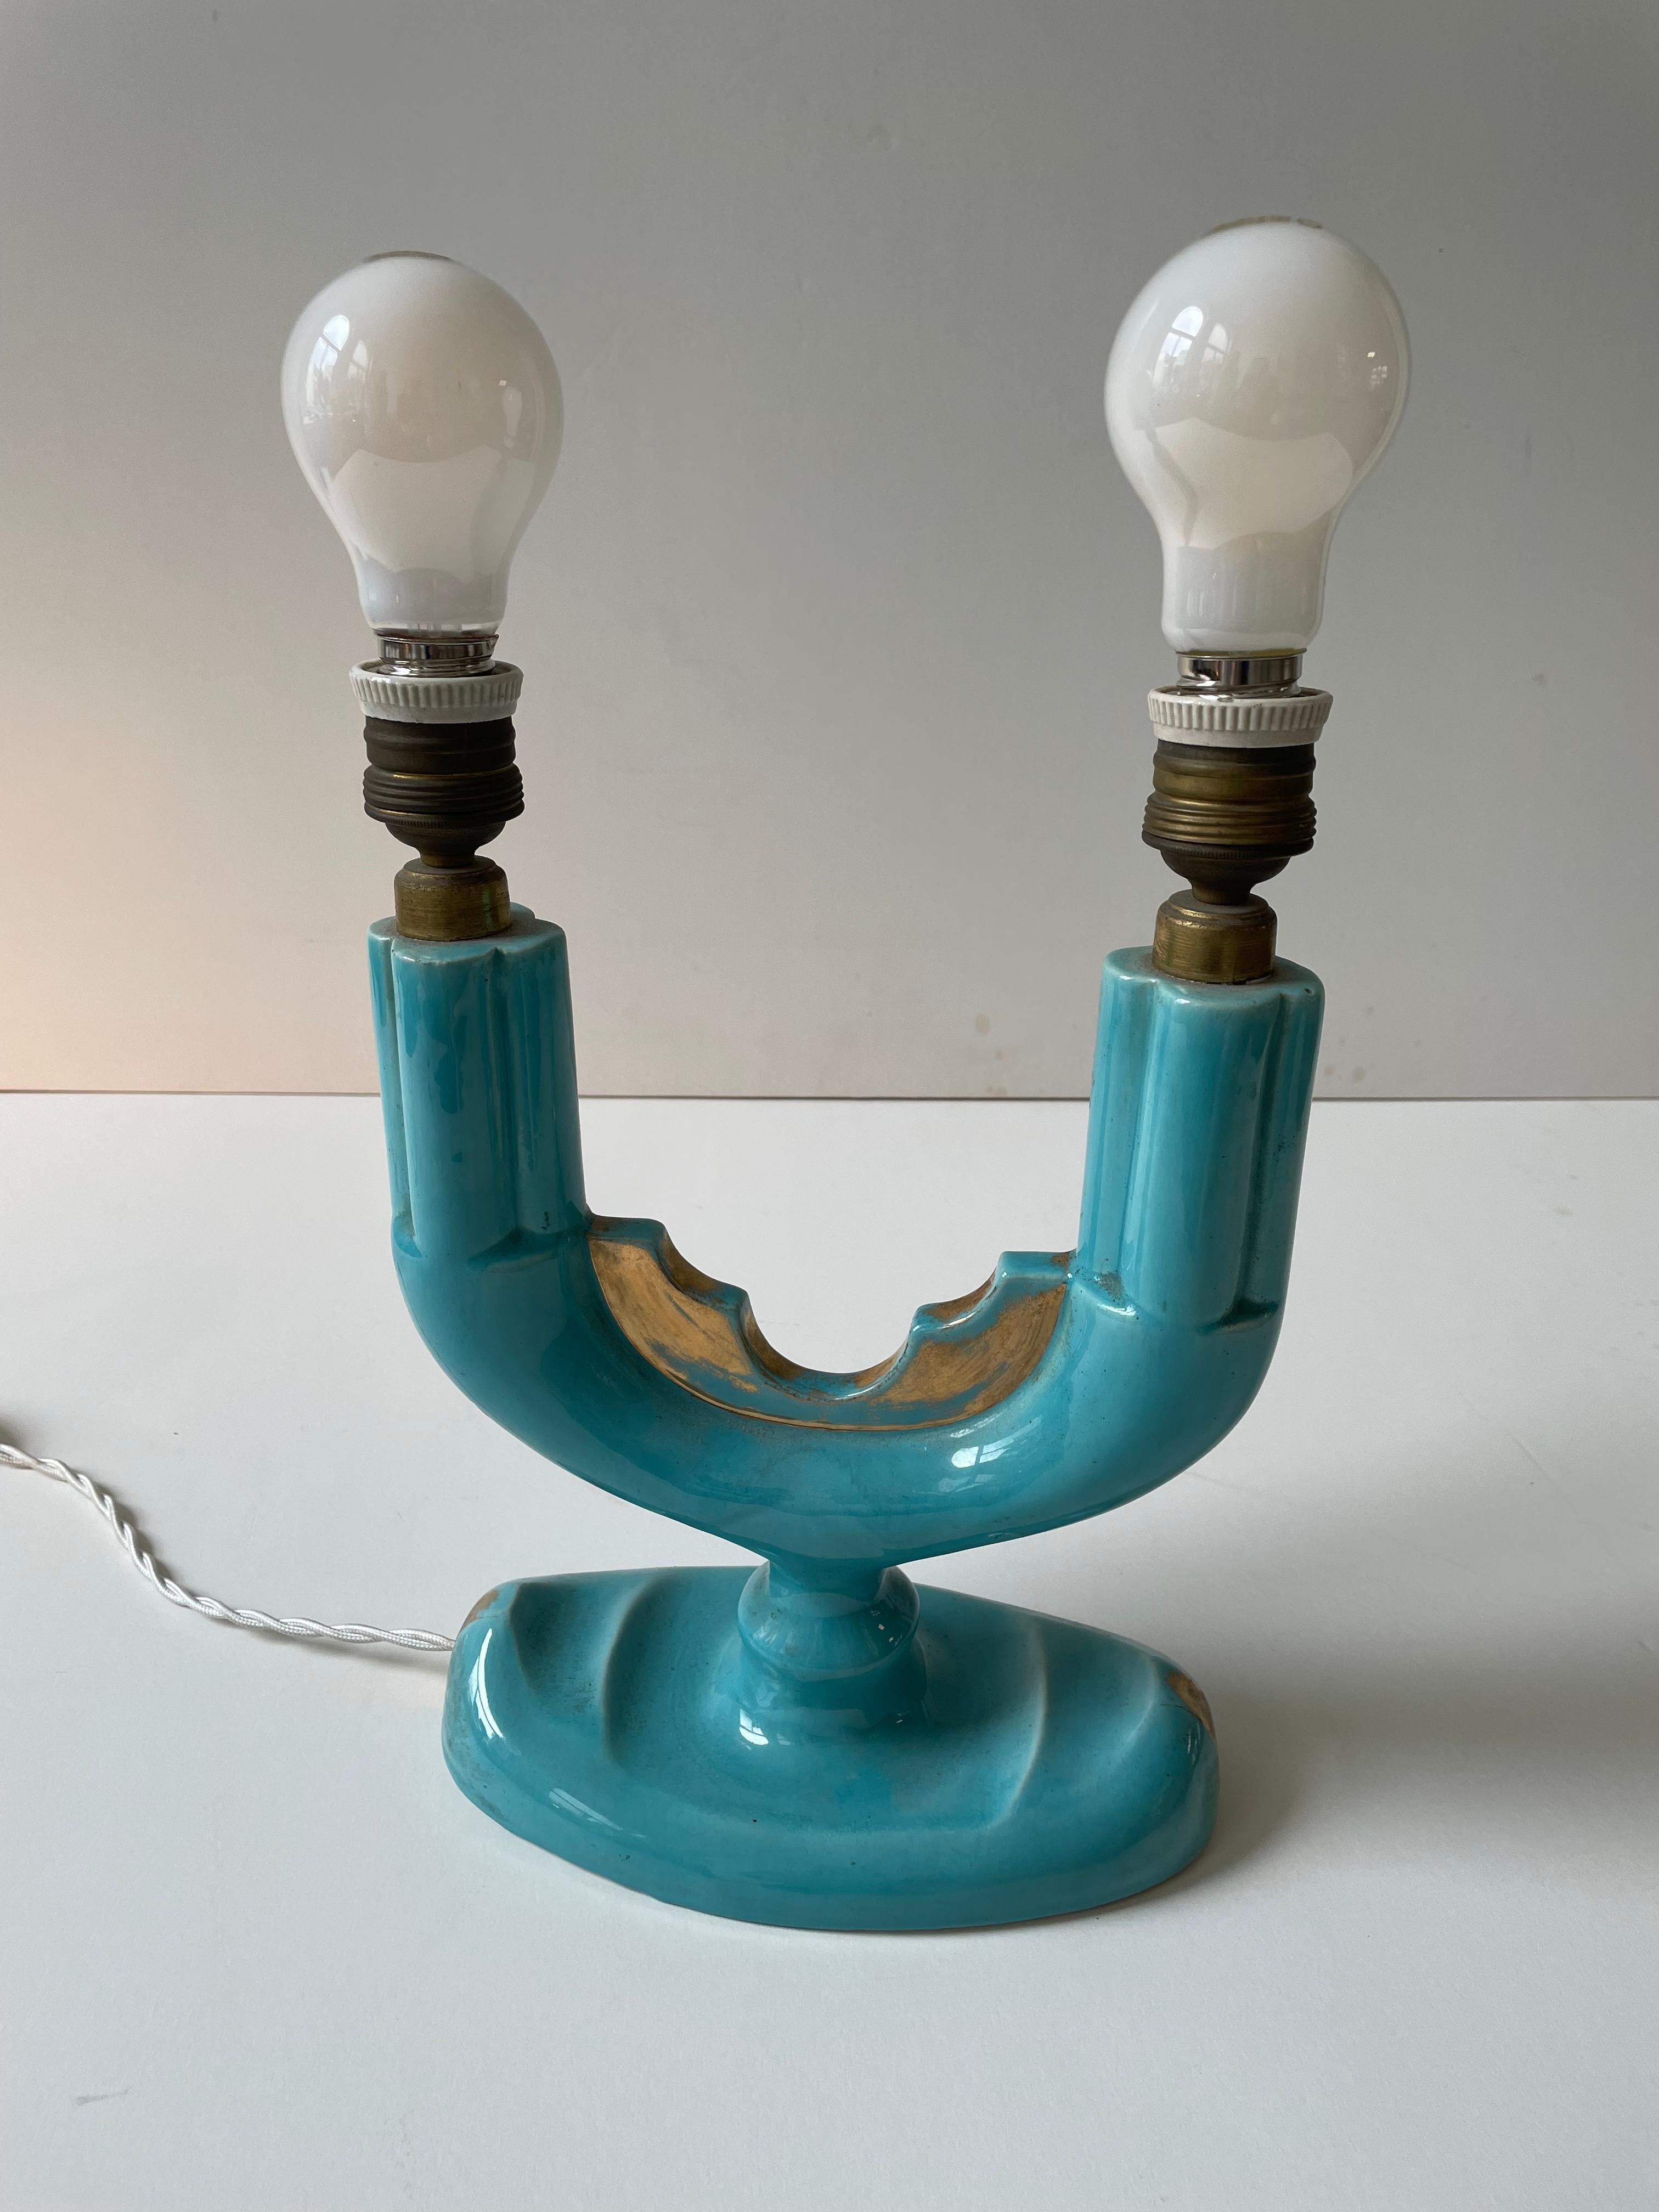 Hand-Crafted Coceram Table Lights  In Turquoise Colour With Raffia Lamp Shades